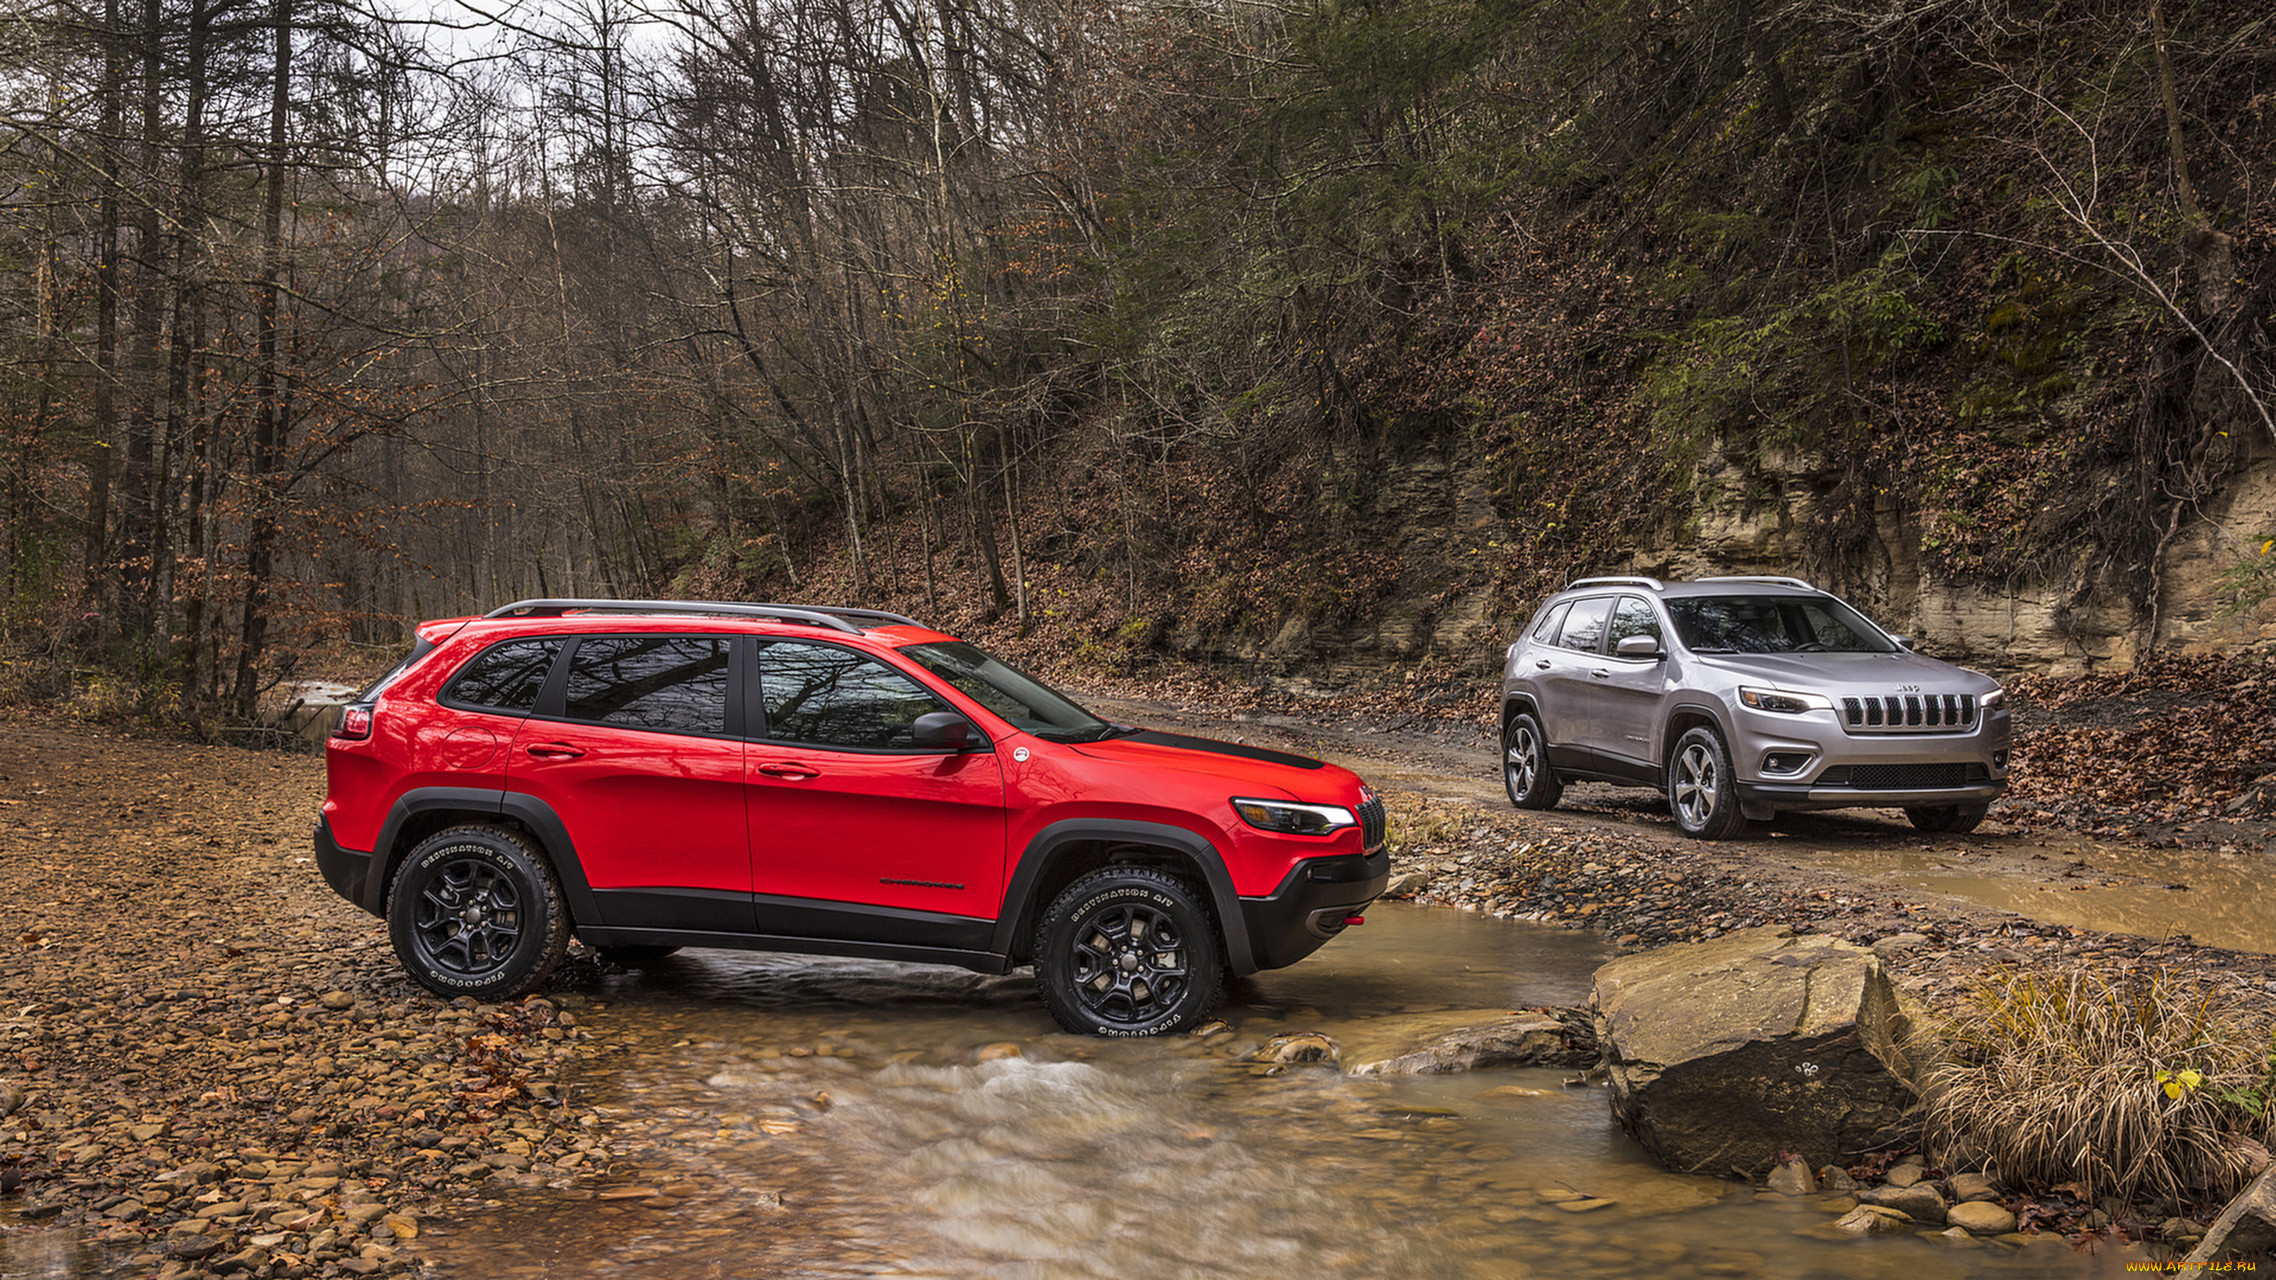 jeep cherokee trailhawk and cherokee limited 2019, , jeep, 2019, limited, cherokee, trailhawk